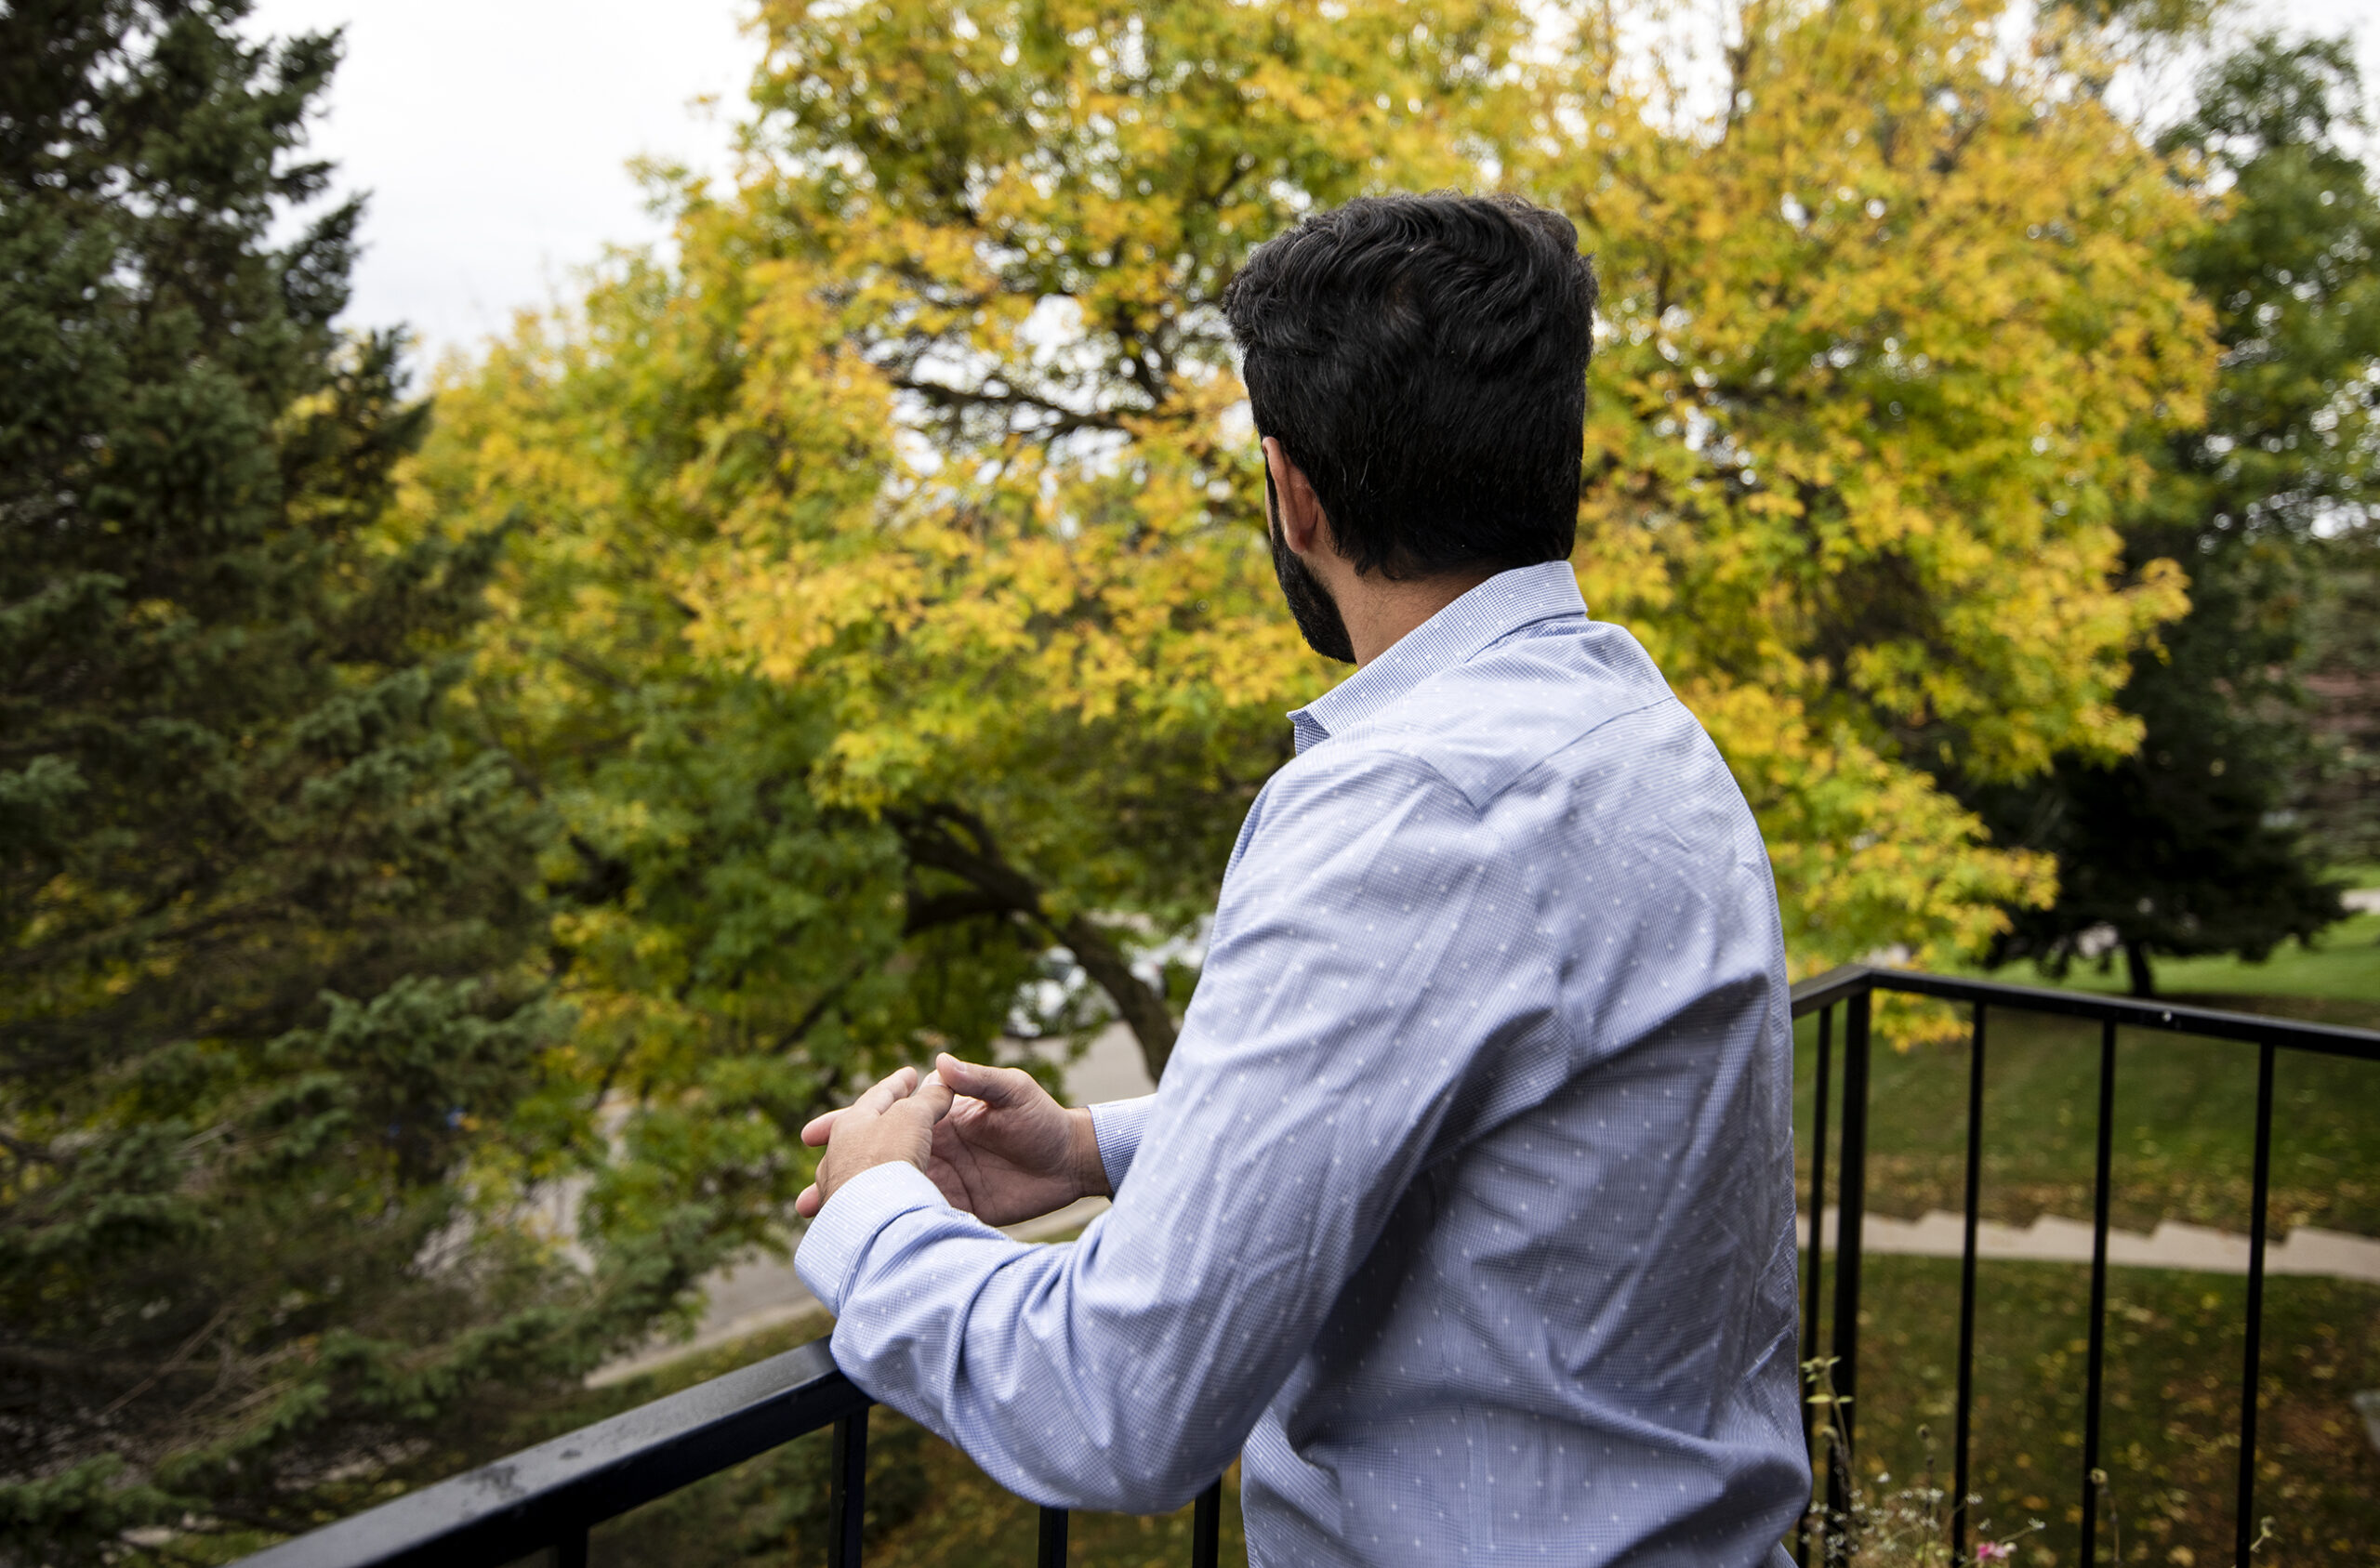 Johnny looks out into a fall landscape from an outdoor balcony.